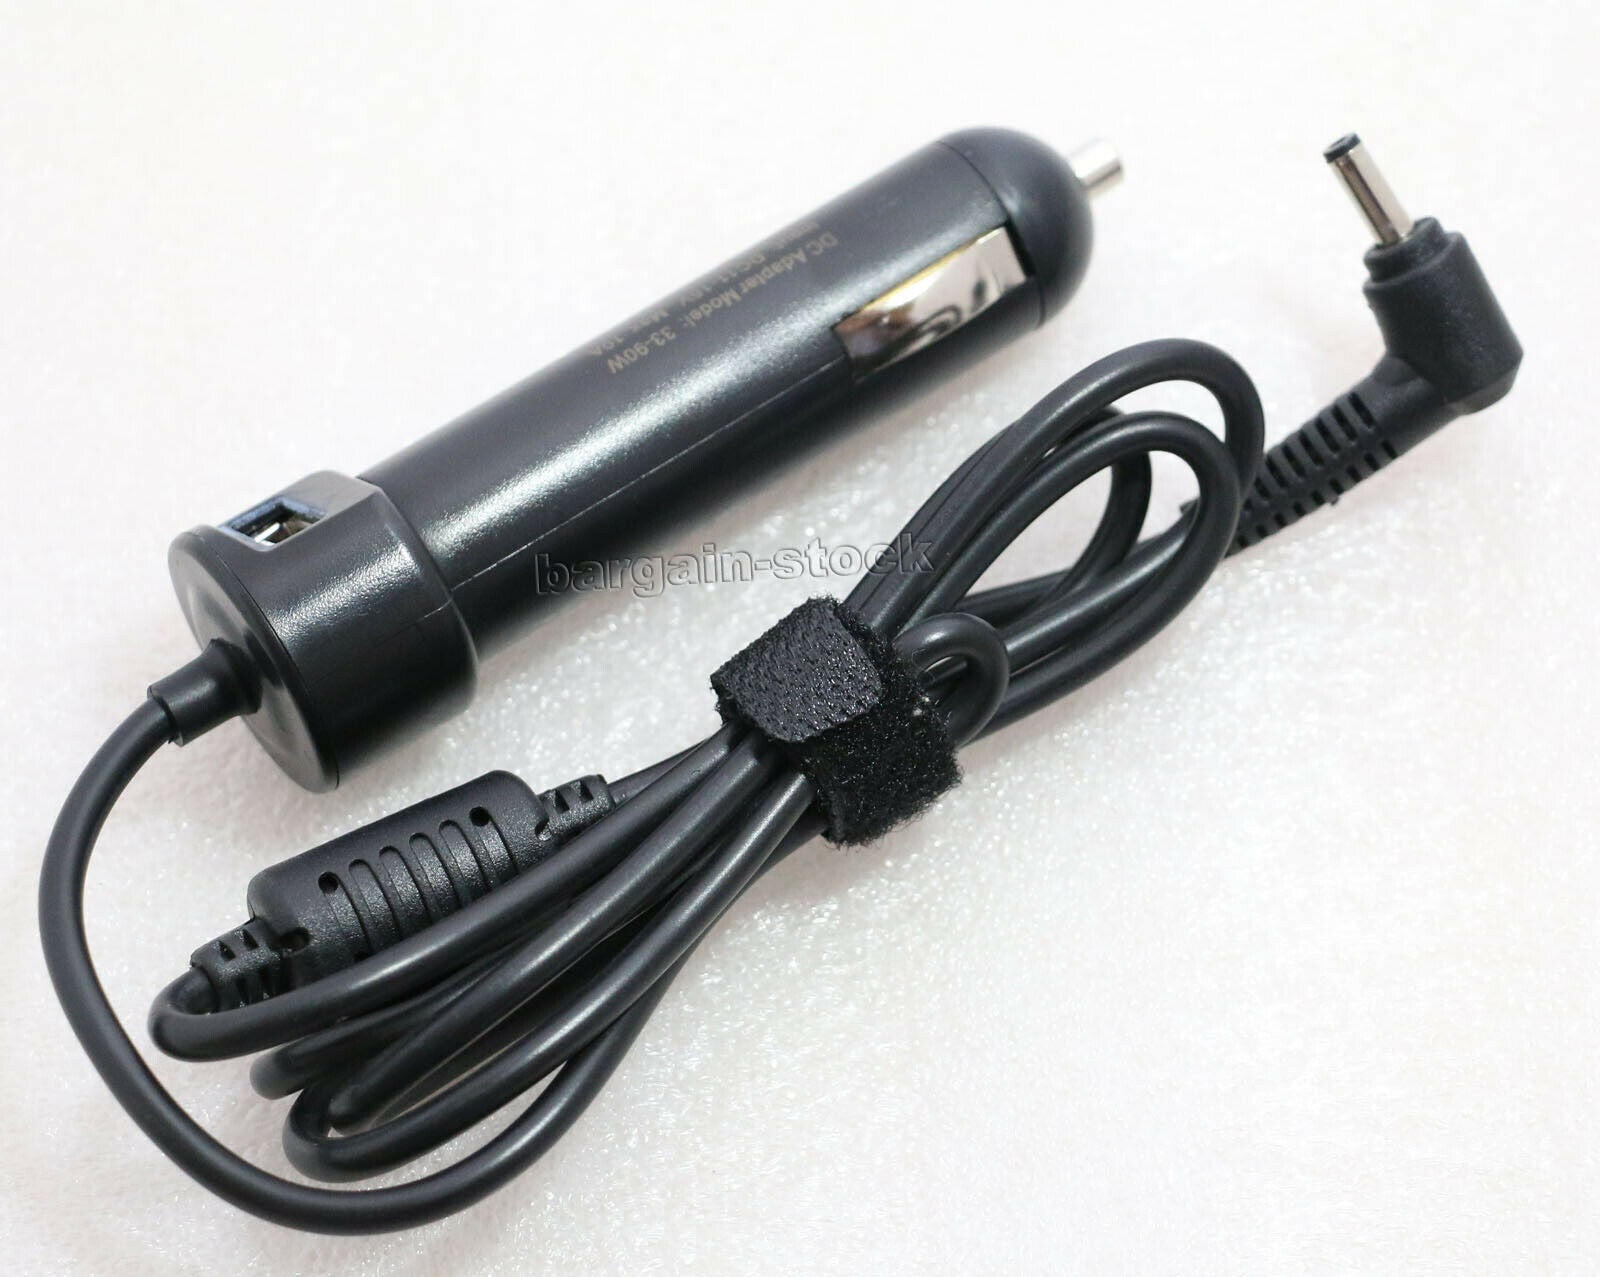 NEW GENUINE 45W Car Charger Adapter For ASUS Zenbook UX21A UX31A UX32A S200E X200E 4.0mm